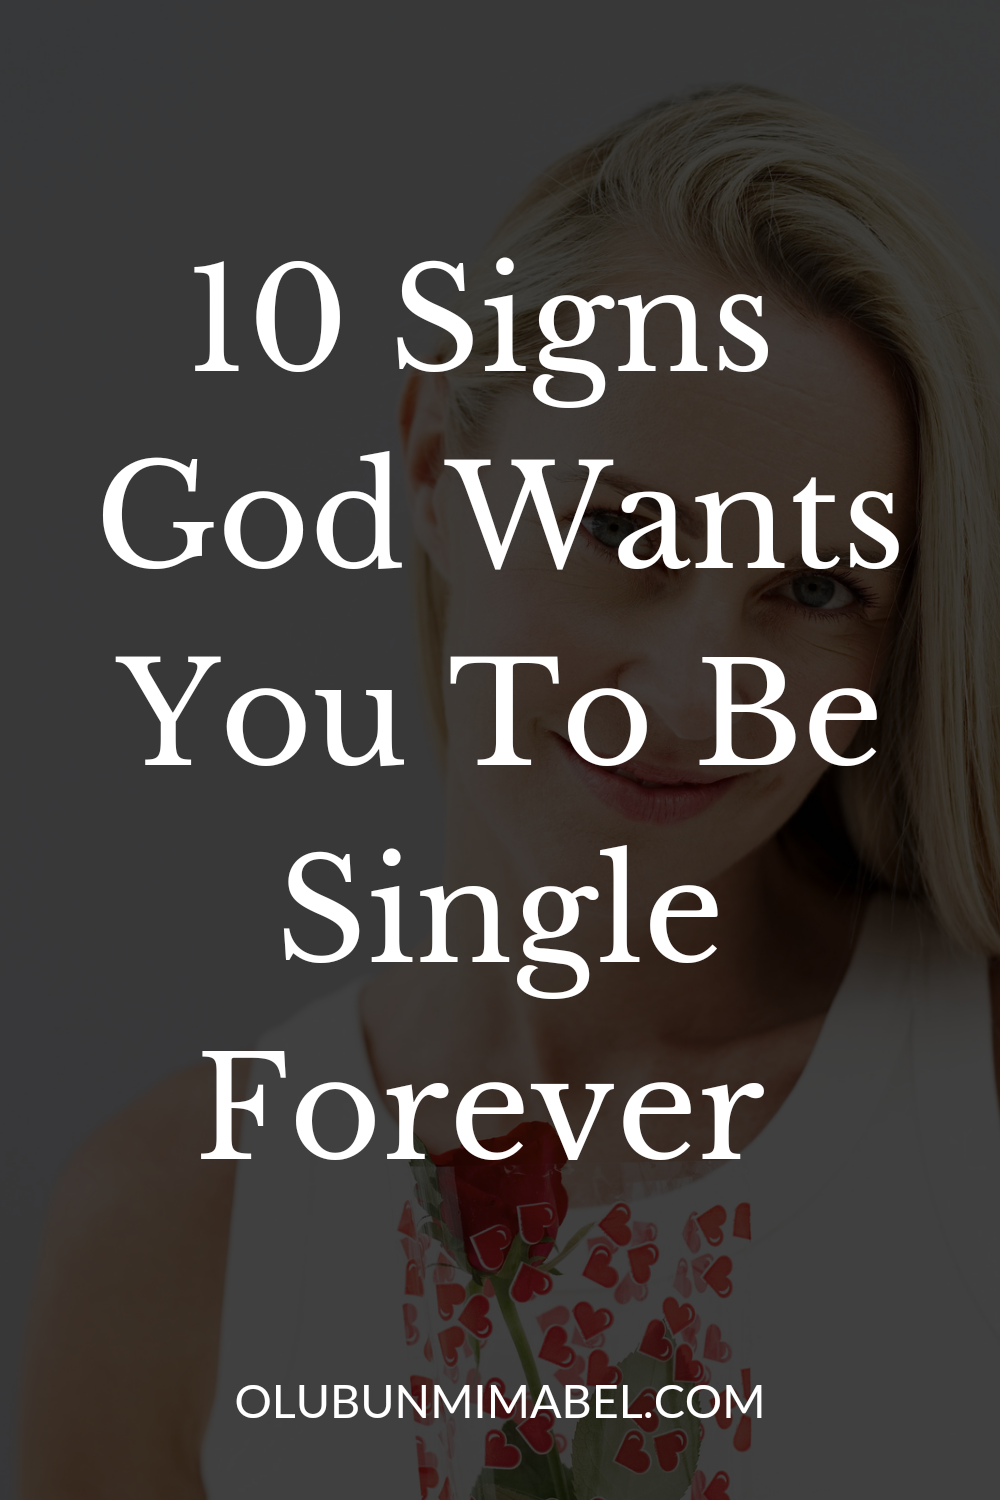 Signs God Wants You To Be Single Forever